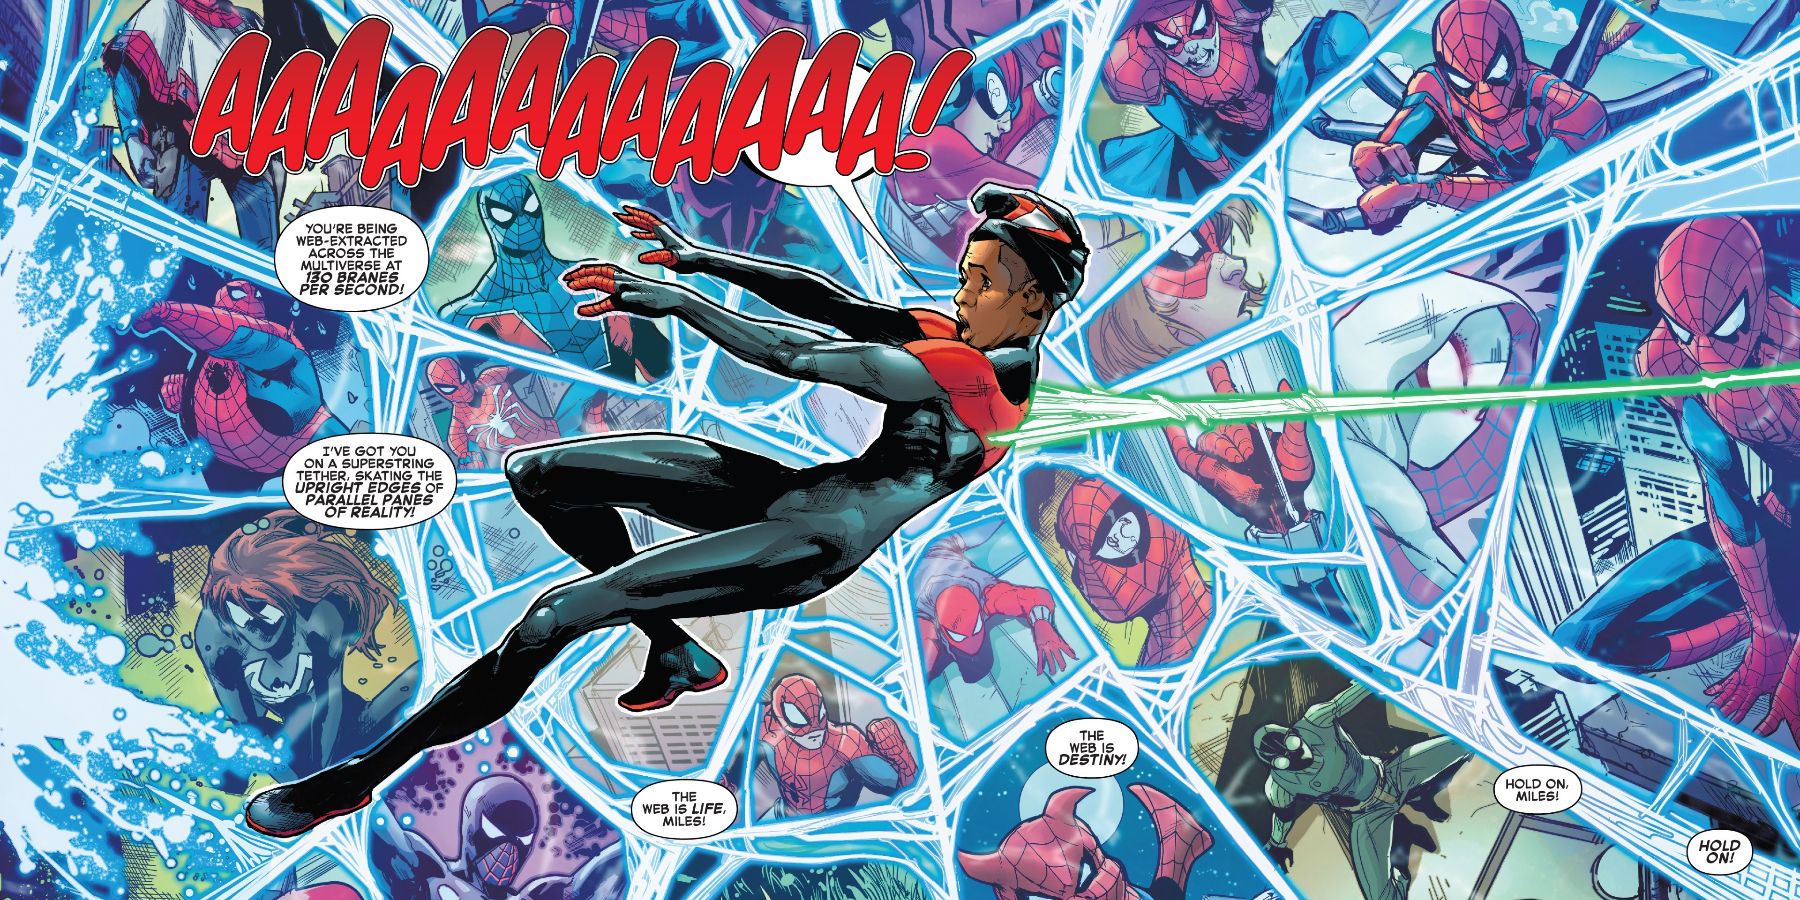 Miles Morales being pulled through the Spider-Verse by a mysterious web in Spider-Verse Spider-Zero